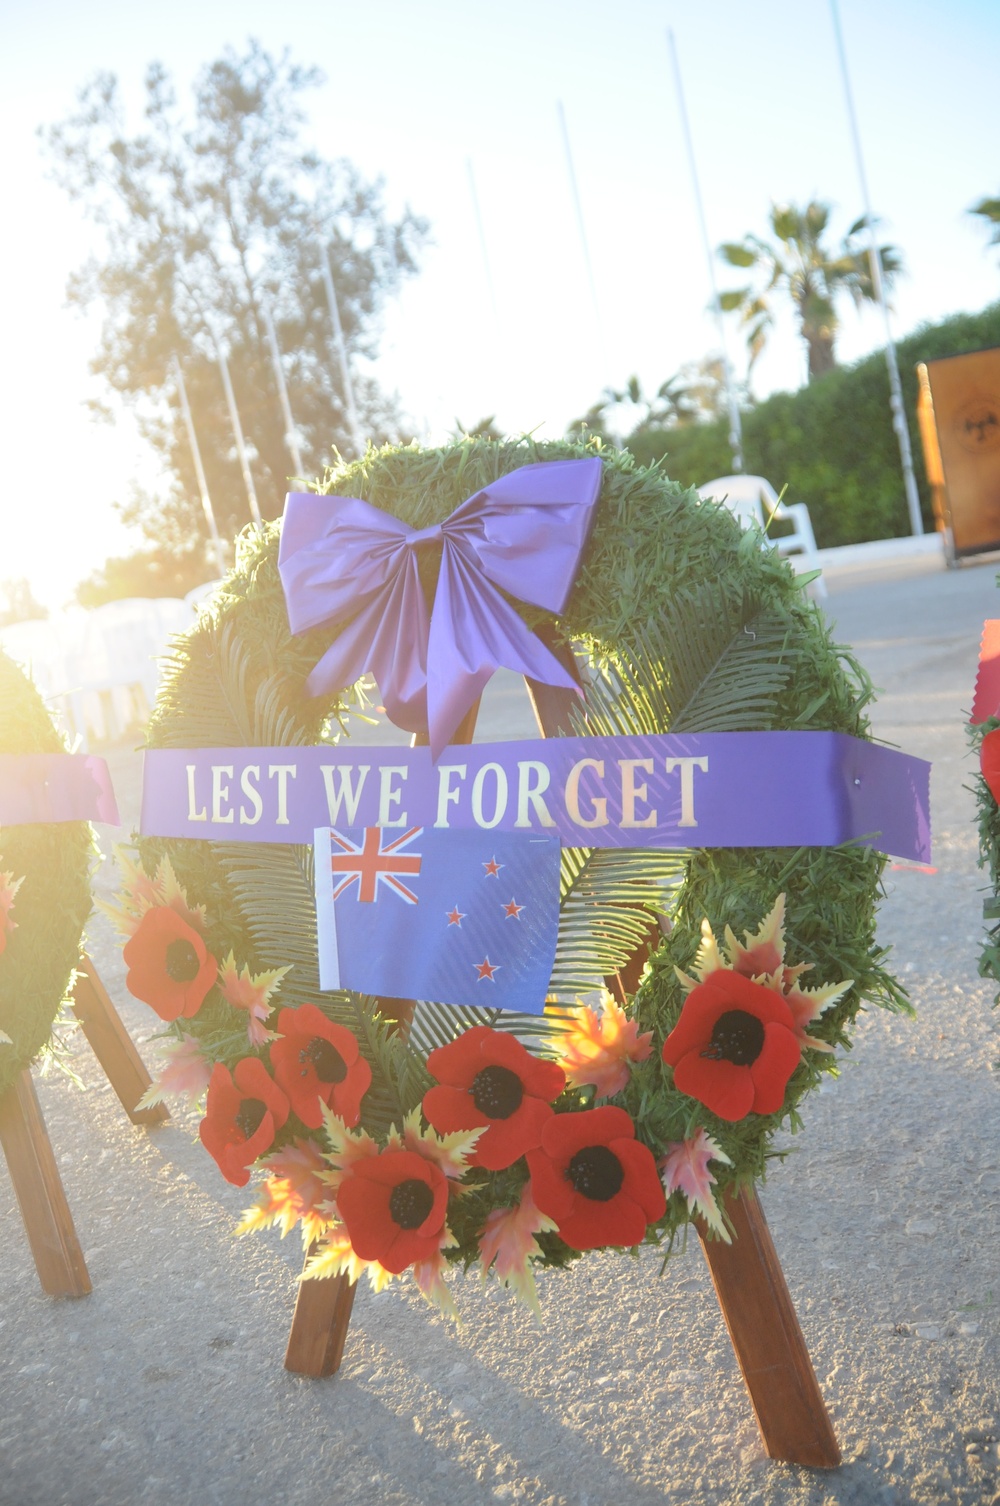 Multinational Force and Observers host ANZAC Day